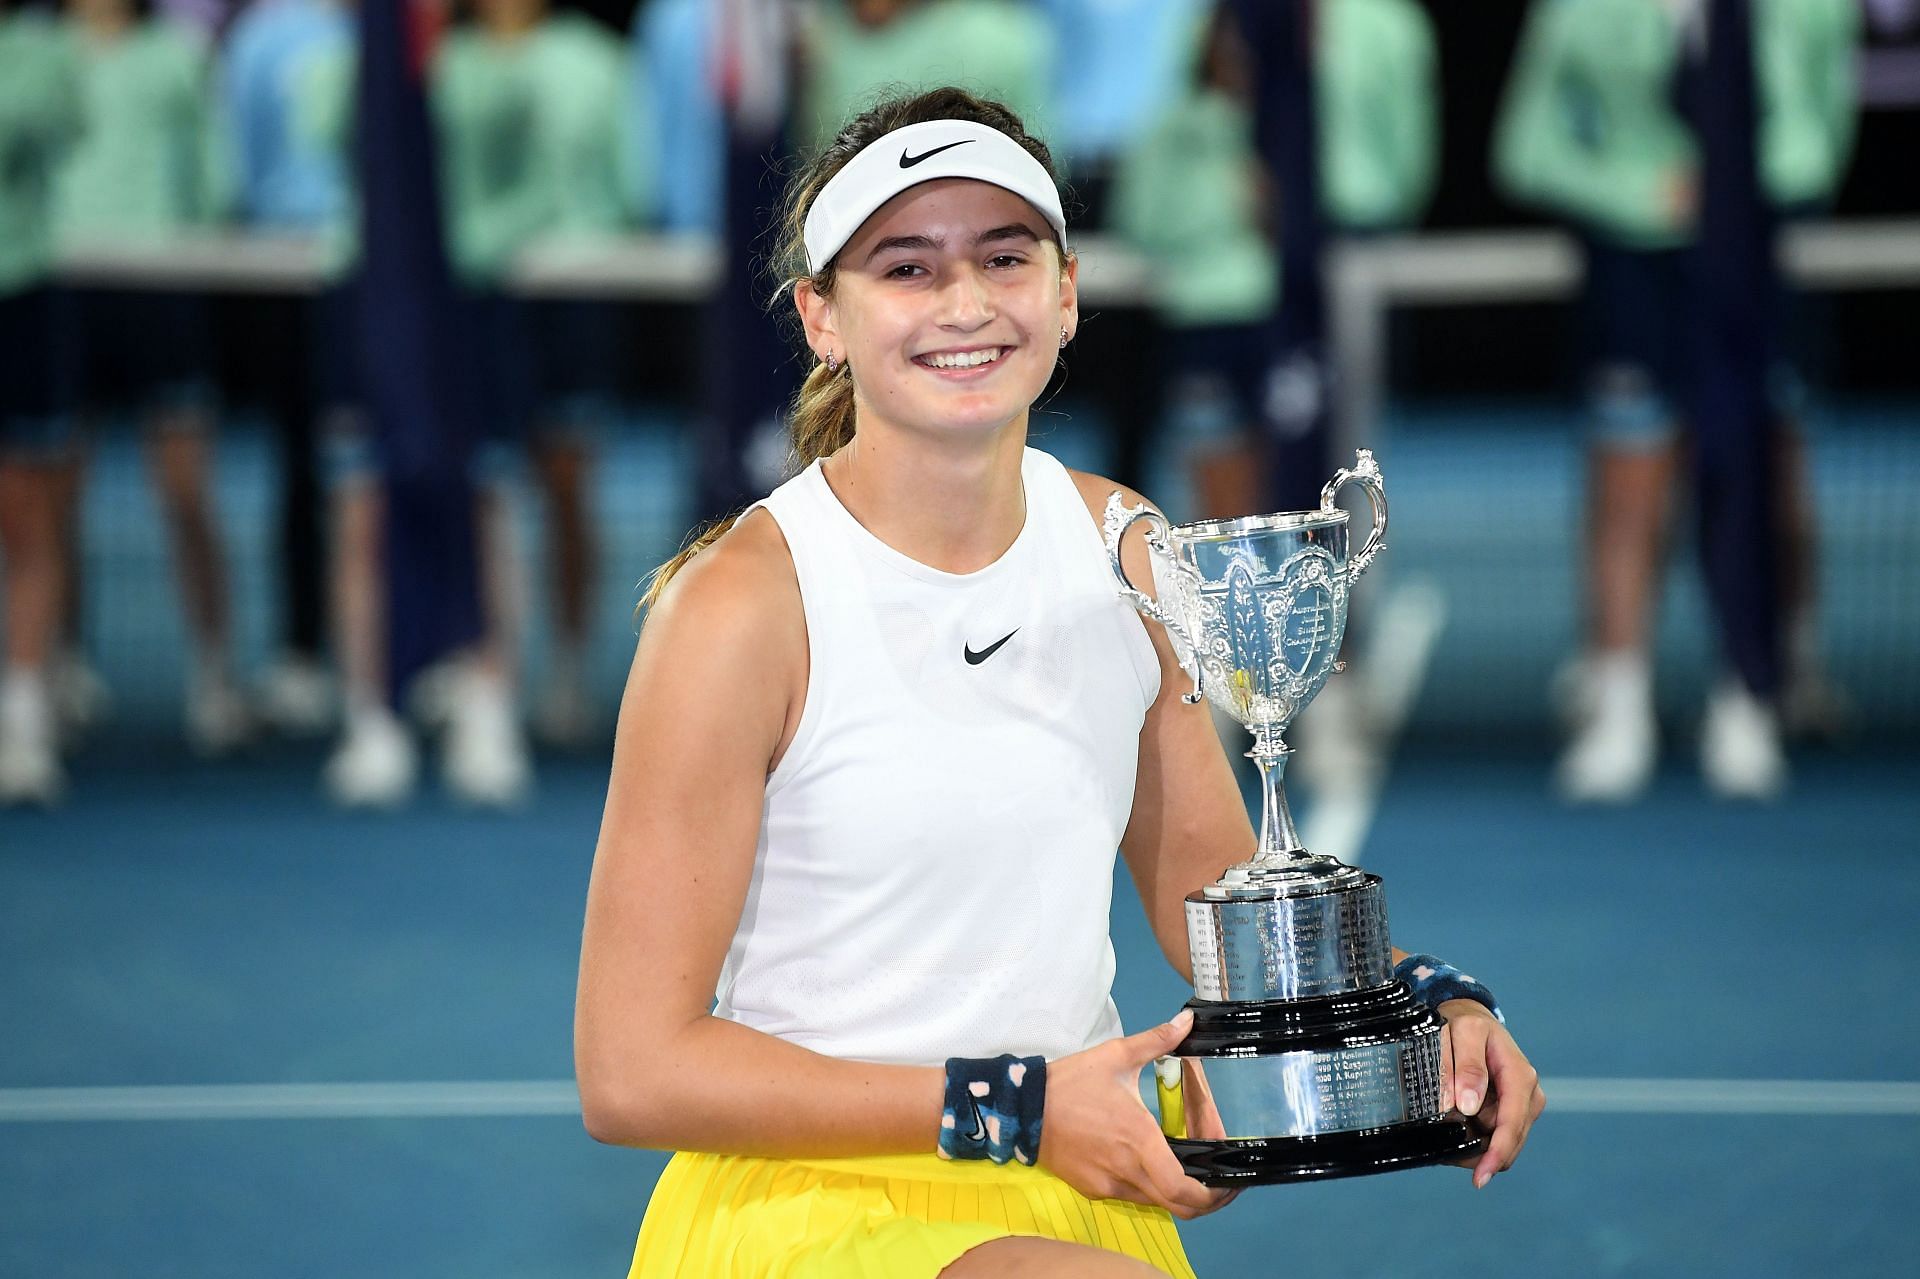 Victoria Jimenez Kasintseva, of Andorra, poses with the championship trophy after winning her Junior Girls&#039; Singles tilte at the 2020 Australian Open at Melbourne Park